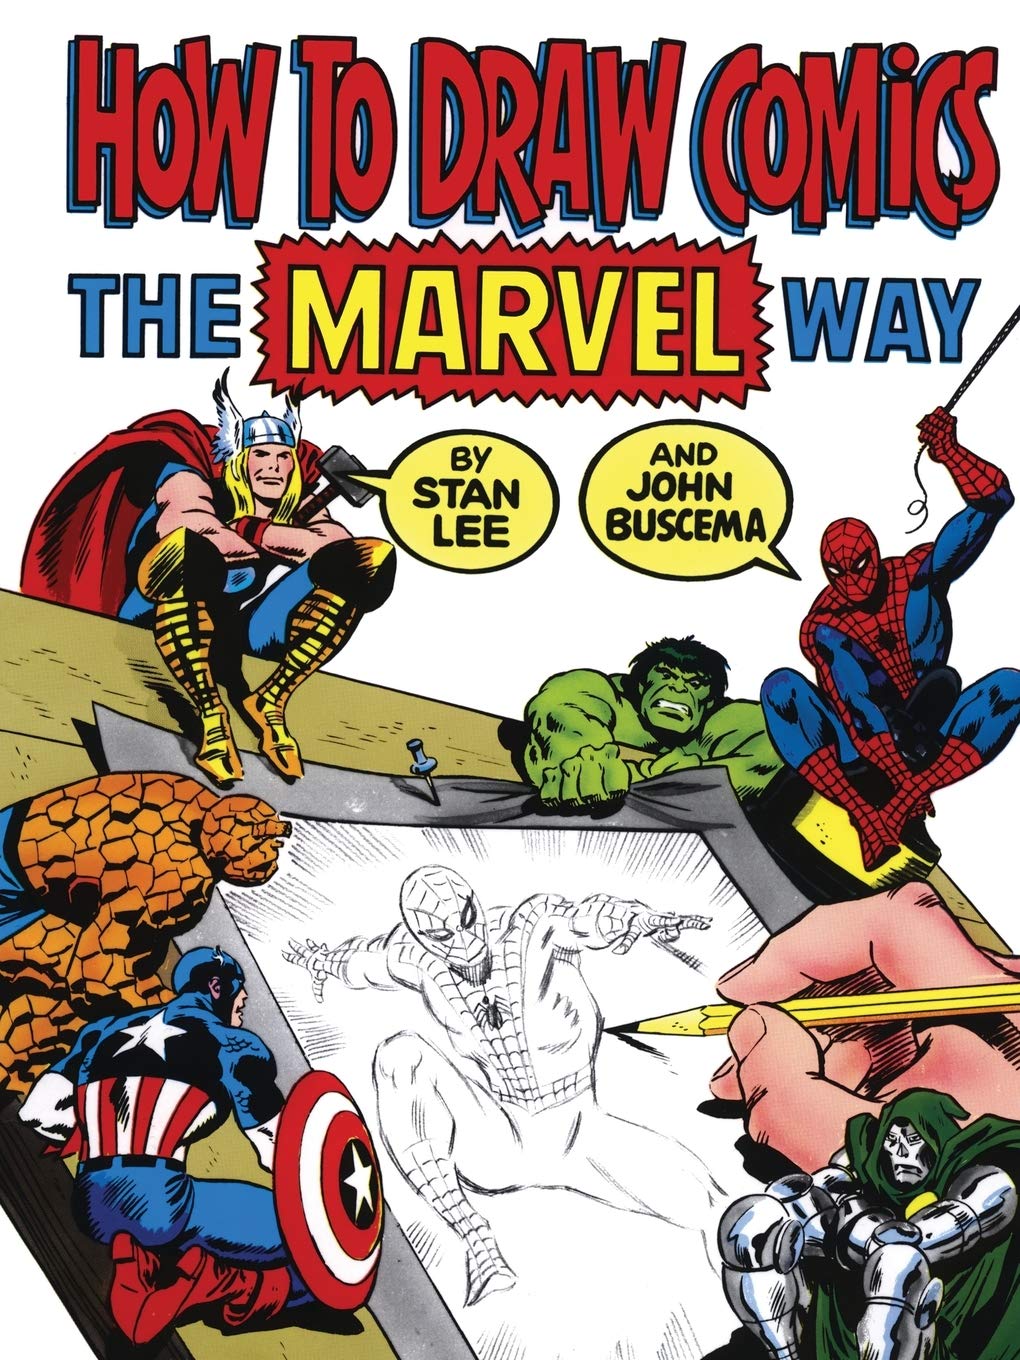 https://www.completeset.com/content/images/2020/11/how-to-draw-comics-the-marvel-way.jpg